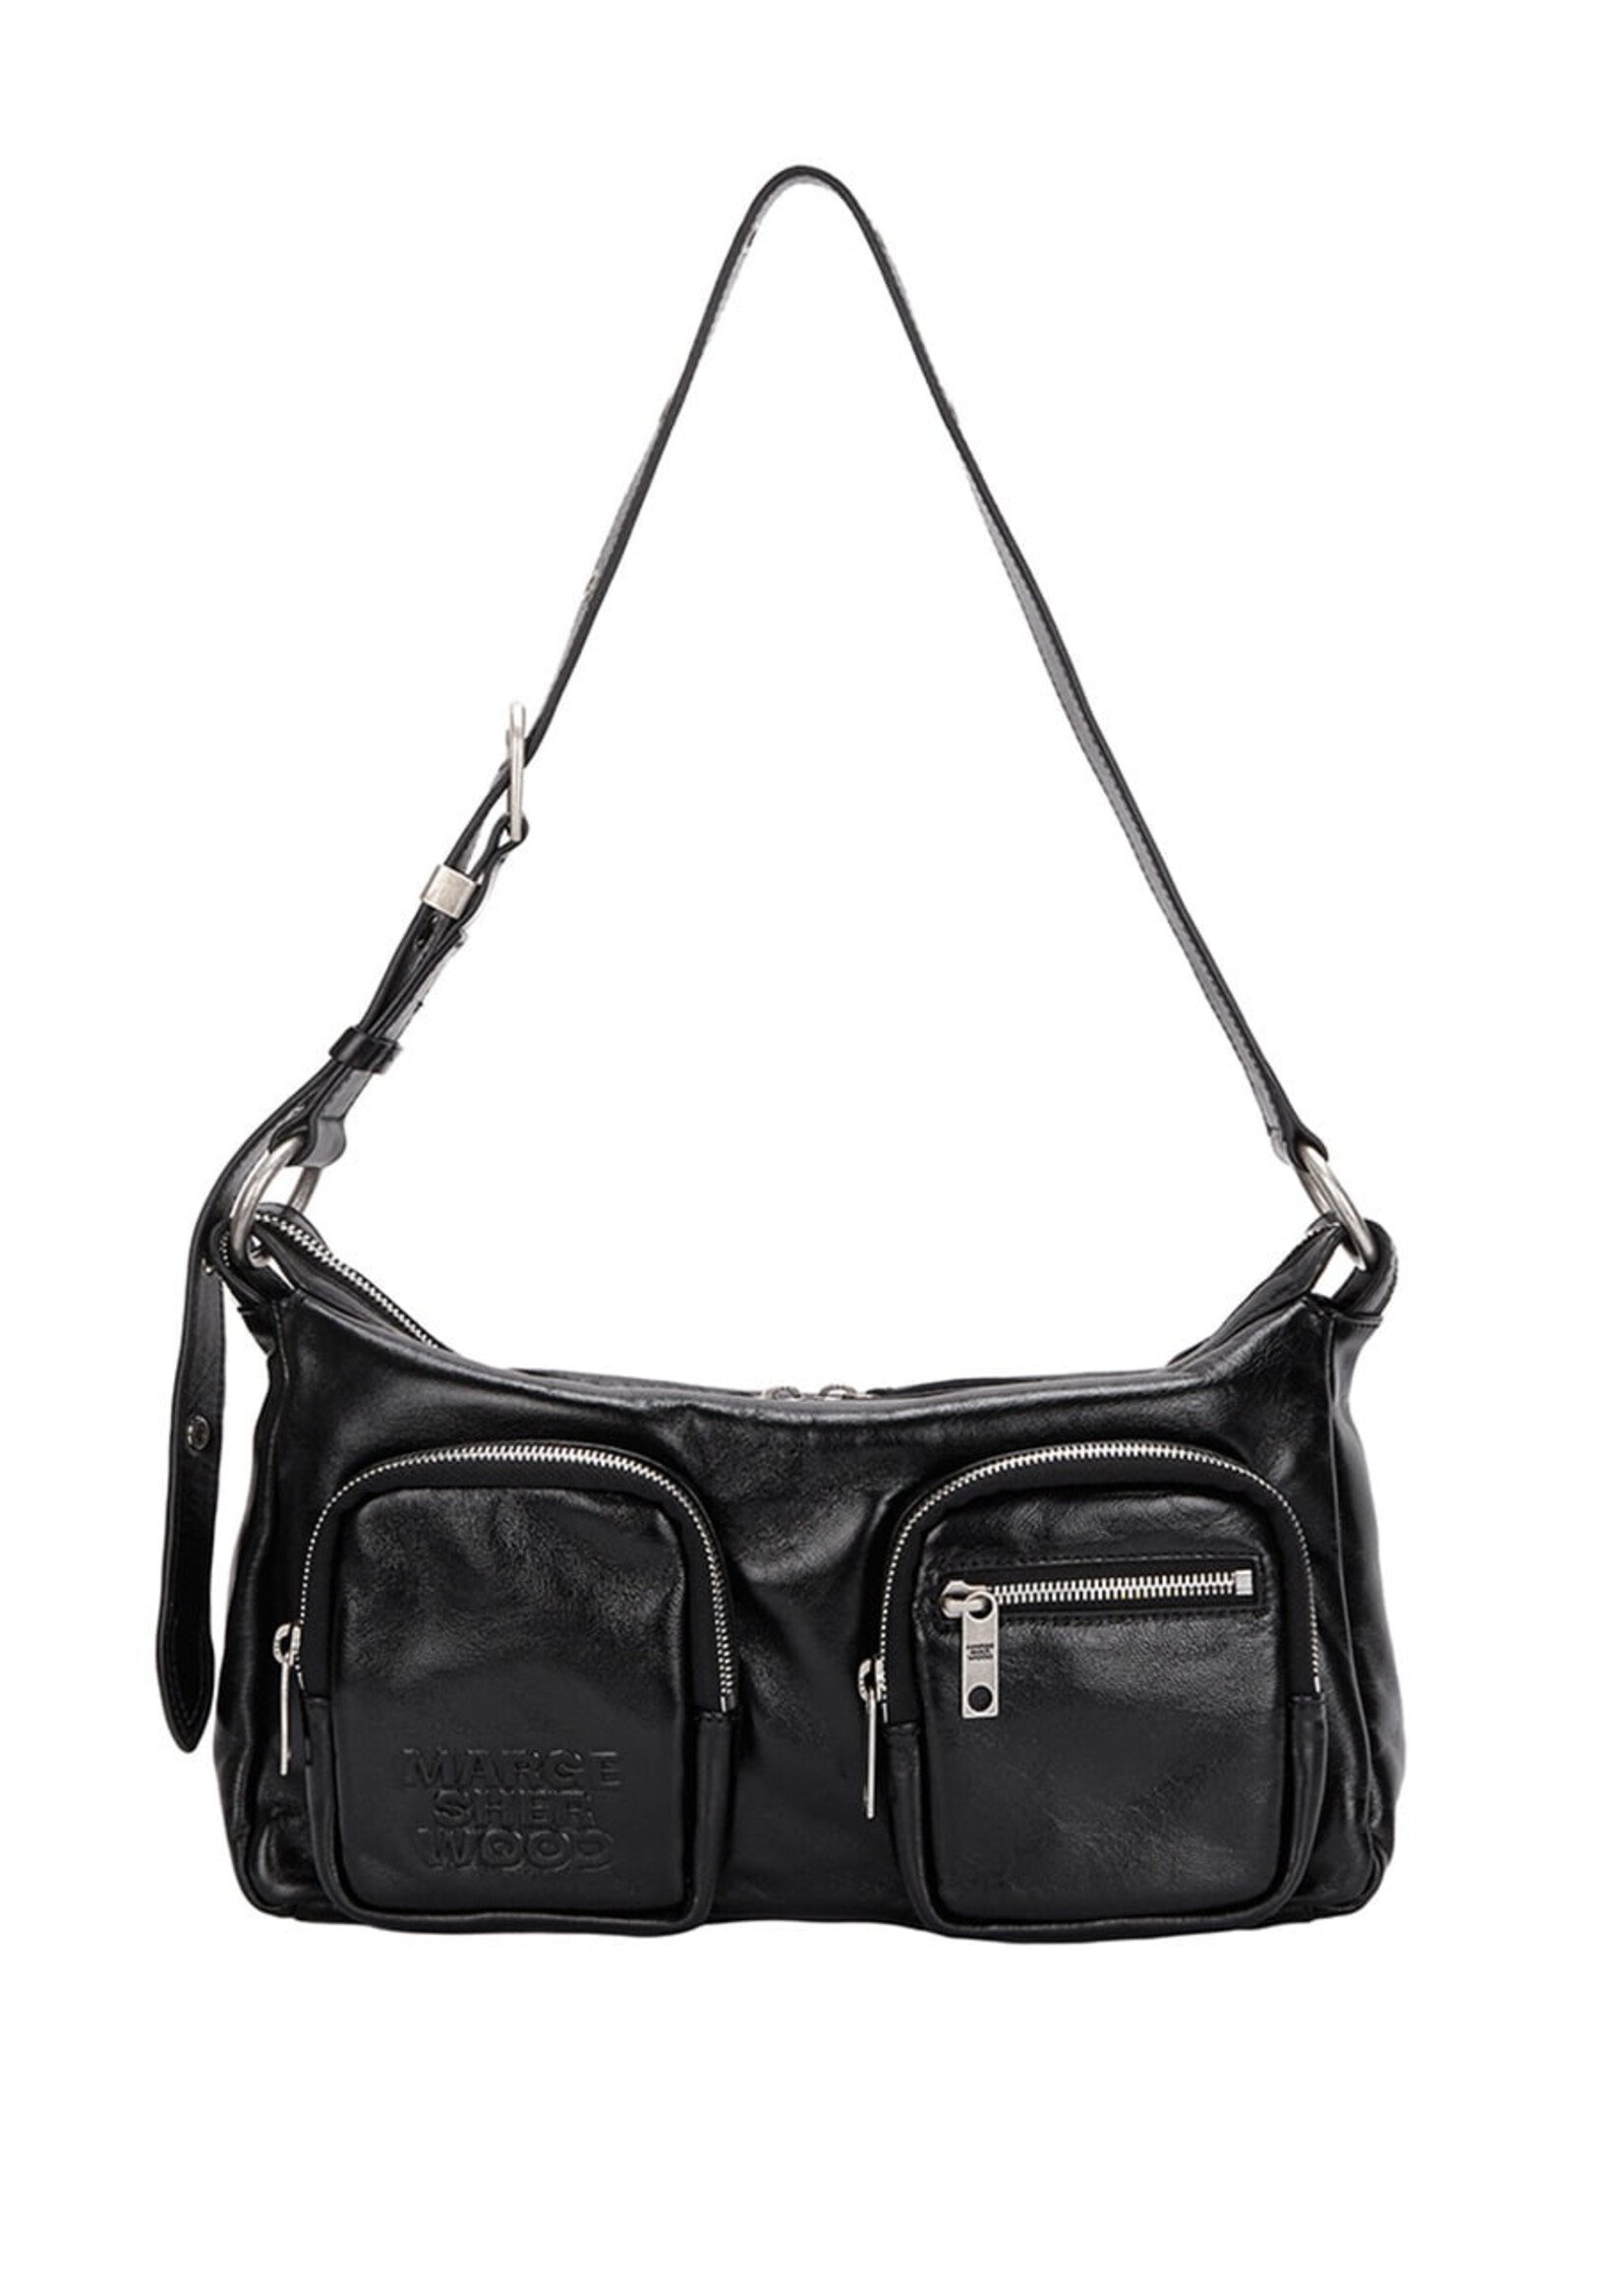 MARGE SHERWOOD Outpocket Hobo Bag in Glossy Black Leather